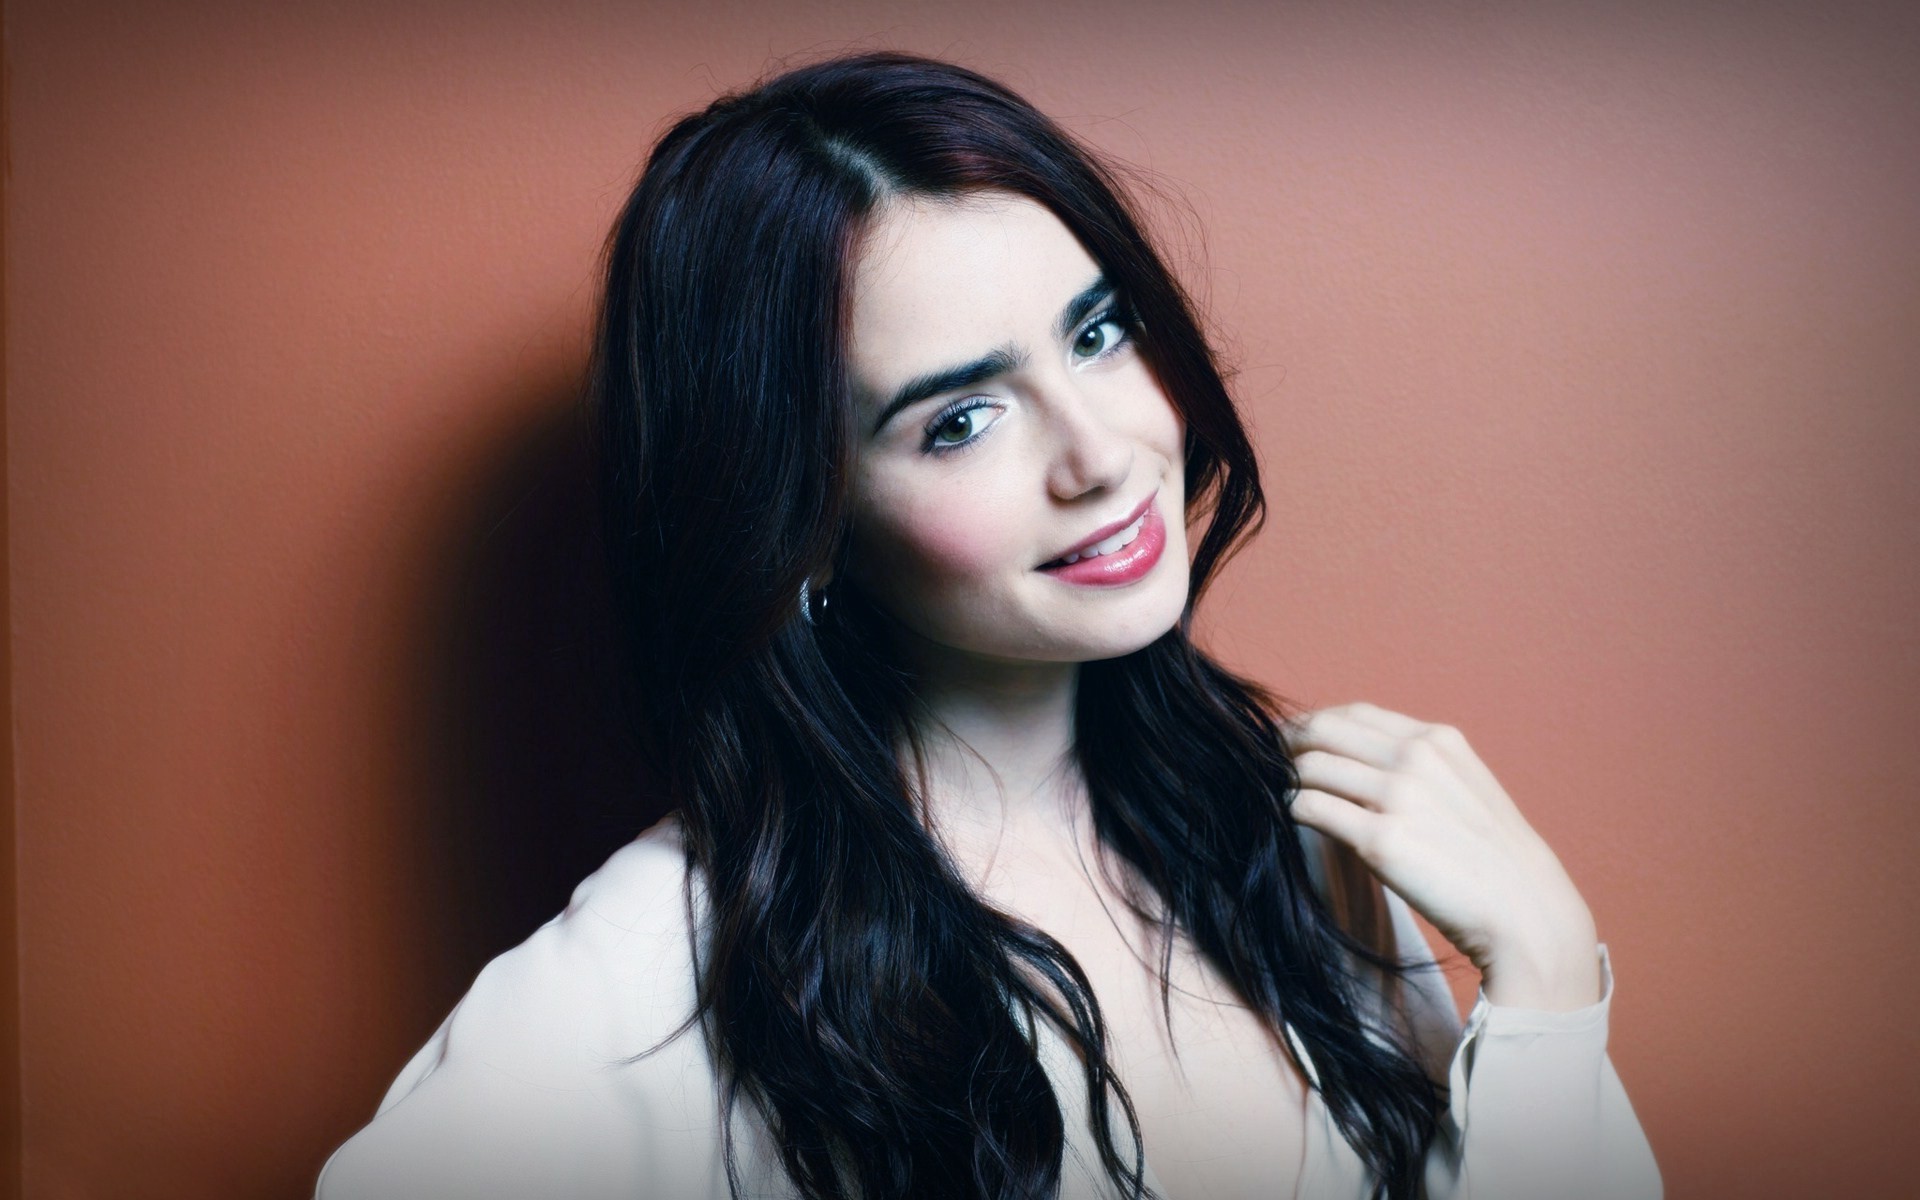 1920x1200 Lily Collins Wallpapers Inspirational Misha Collins Wallpapers 65 Images Of  Lily Collins Wallpapers Inspirational Misha Collins